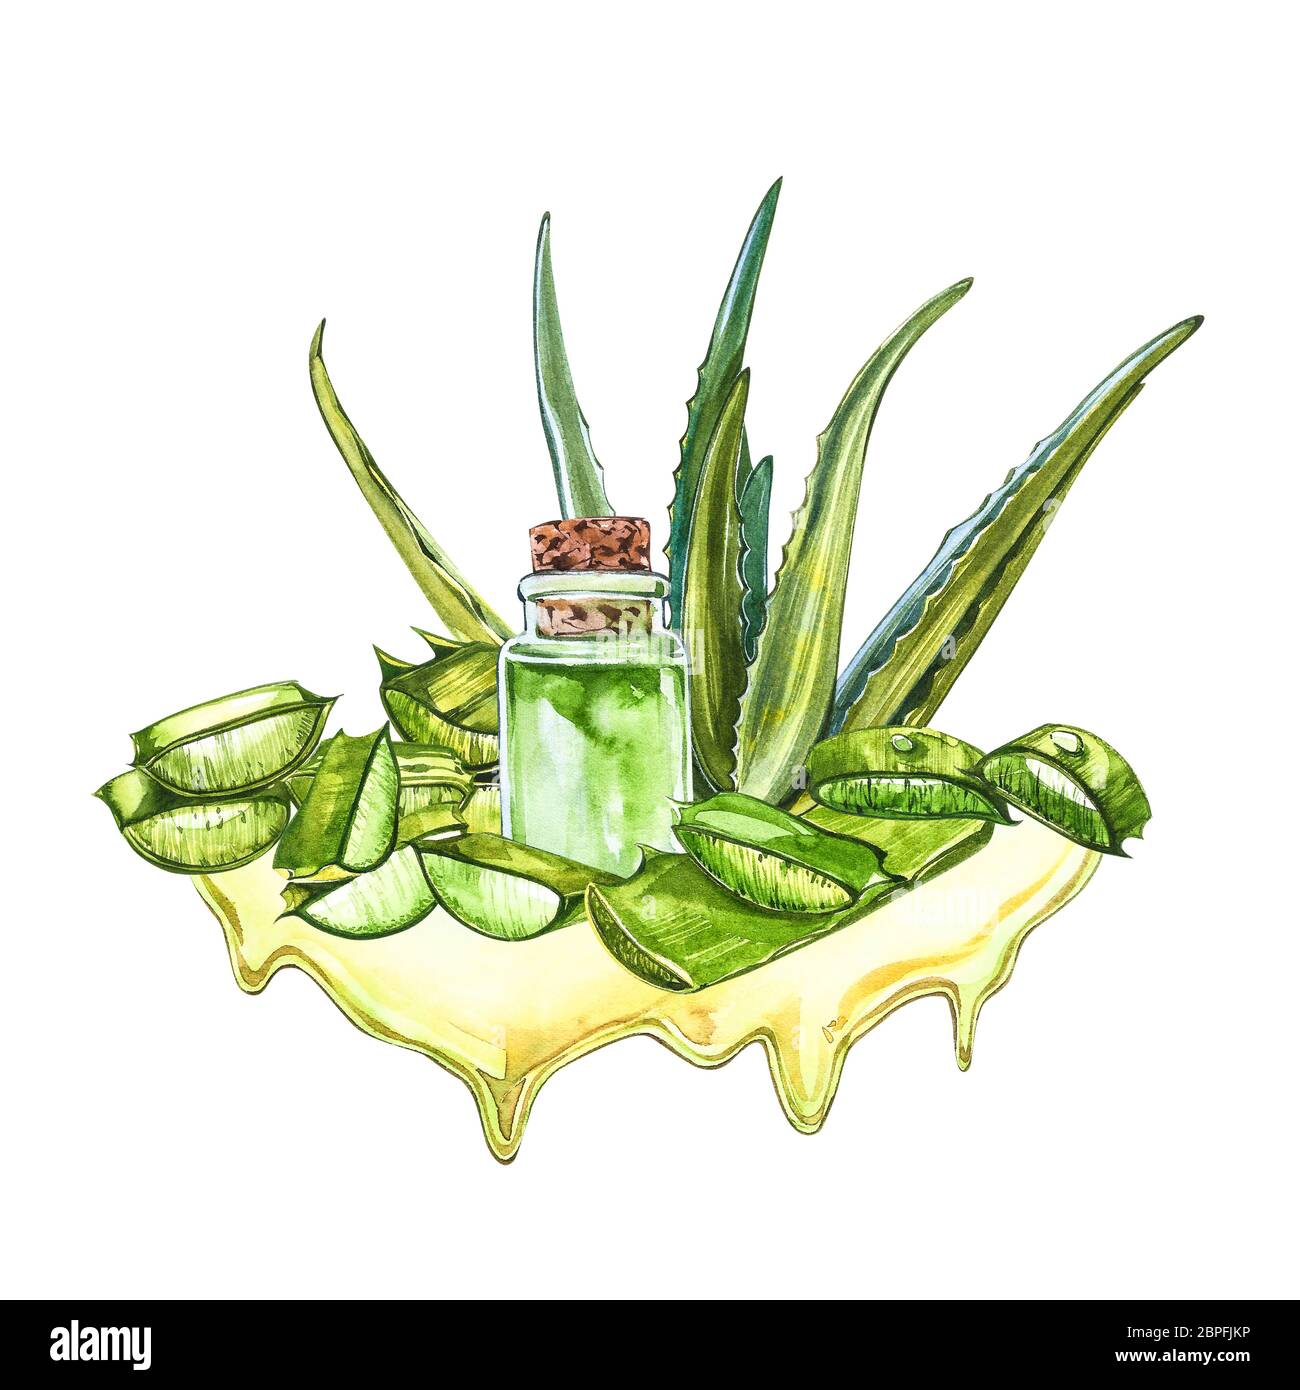 Aloe Vera | Aloe Barbadensis | First Aid Plant | Patch